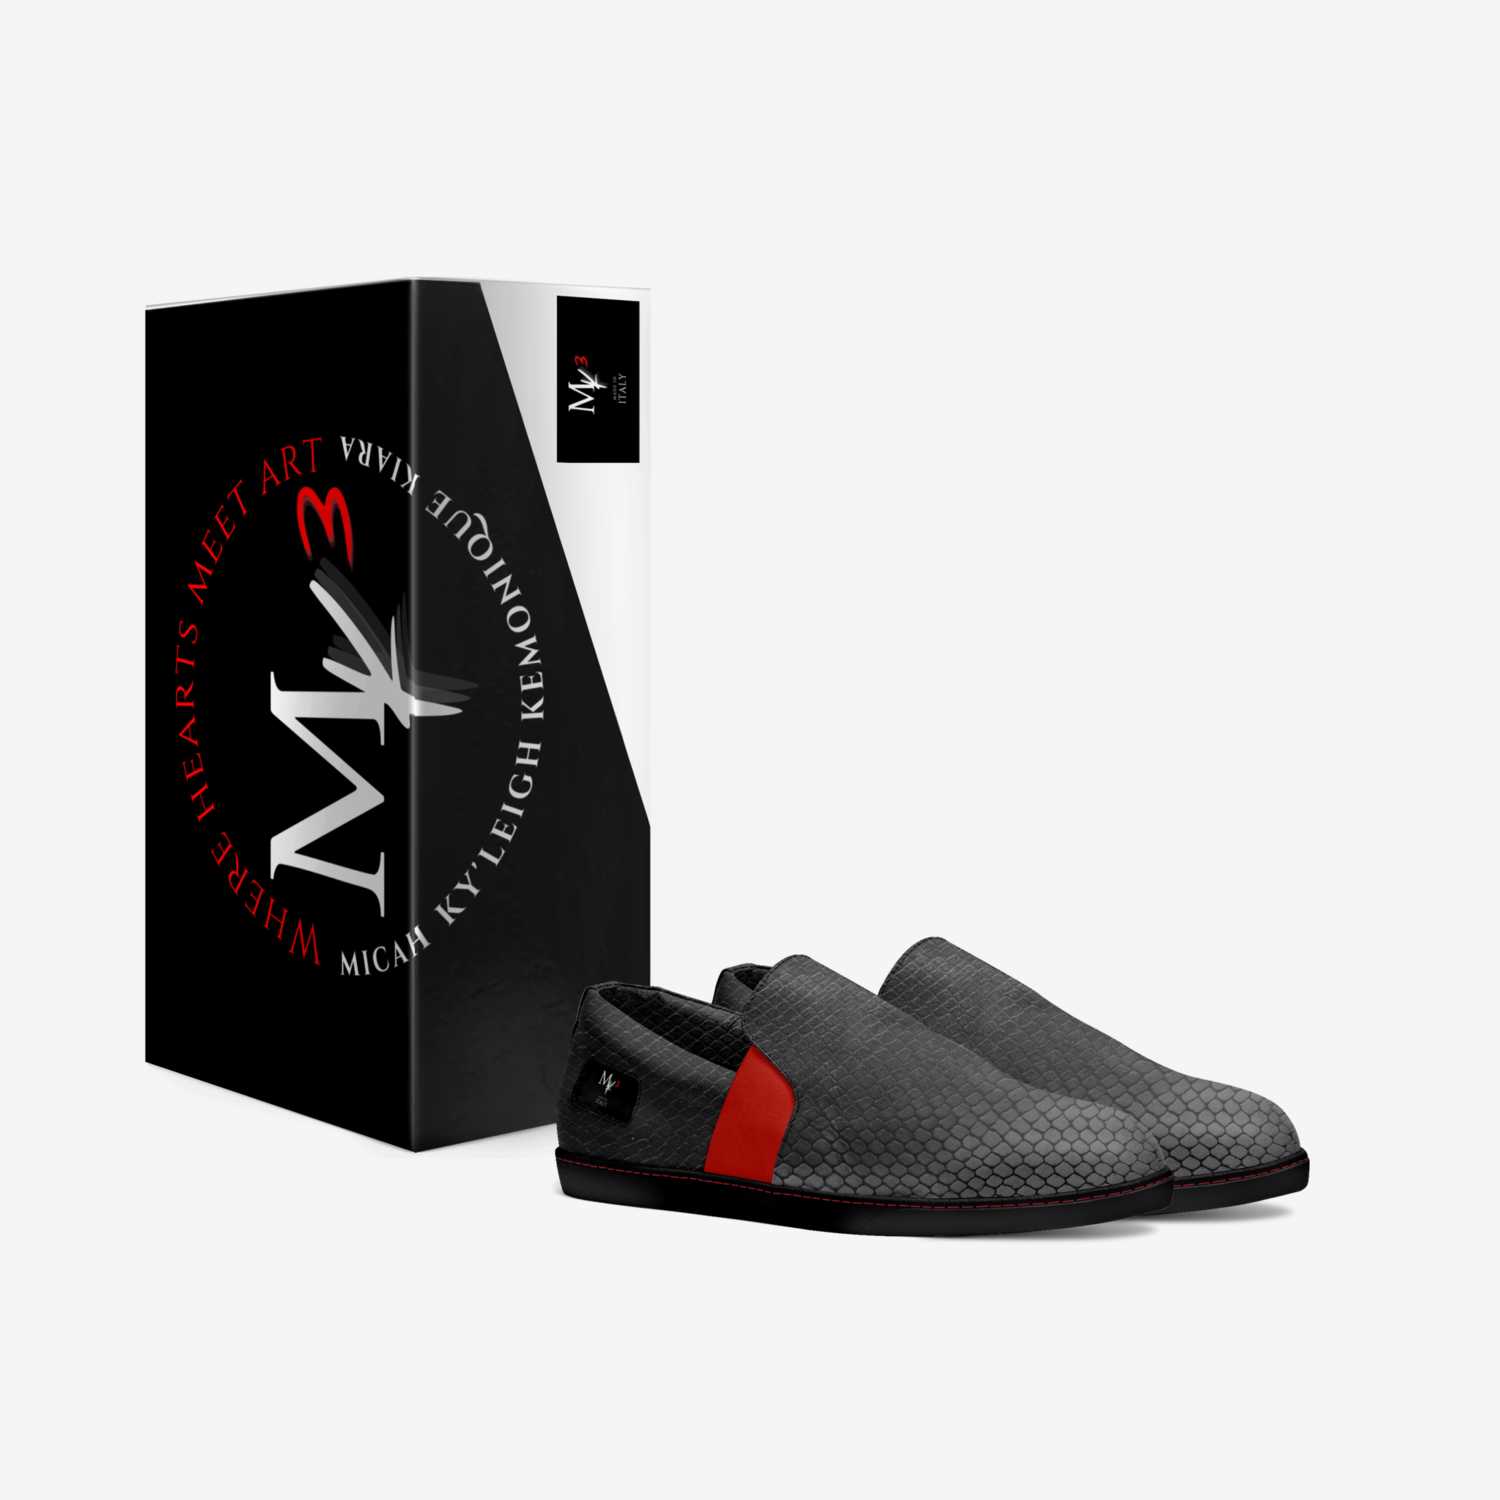 Micah custom made in Italy shoes by Conrad Campbell | Box view